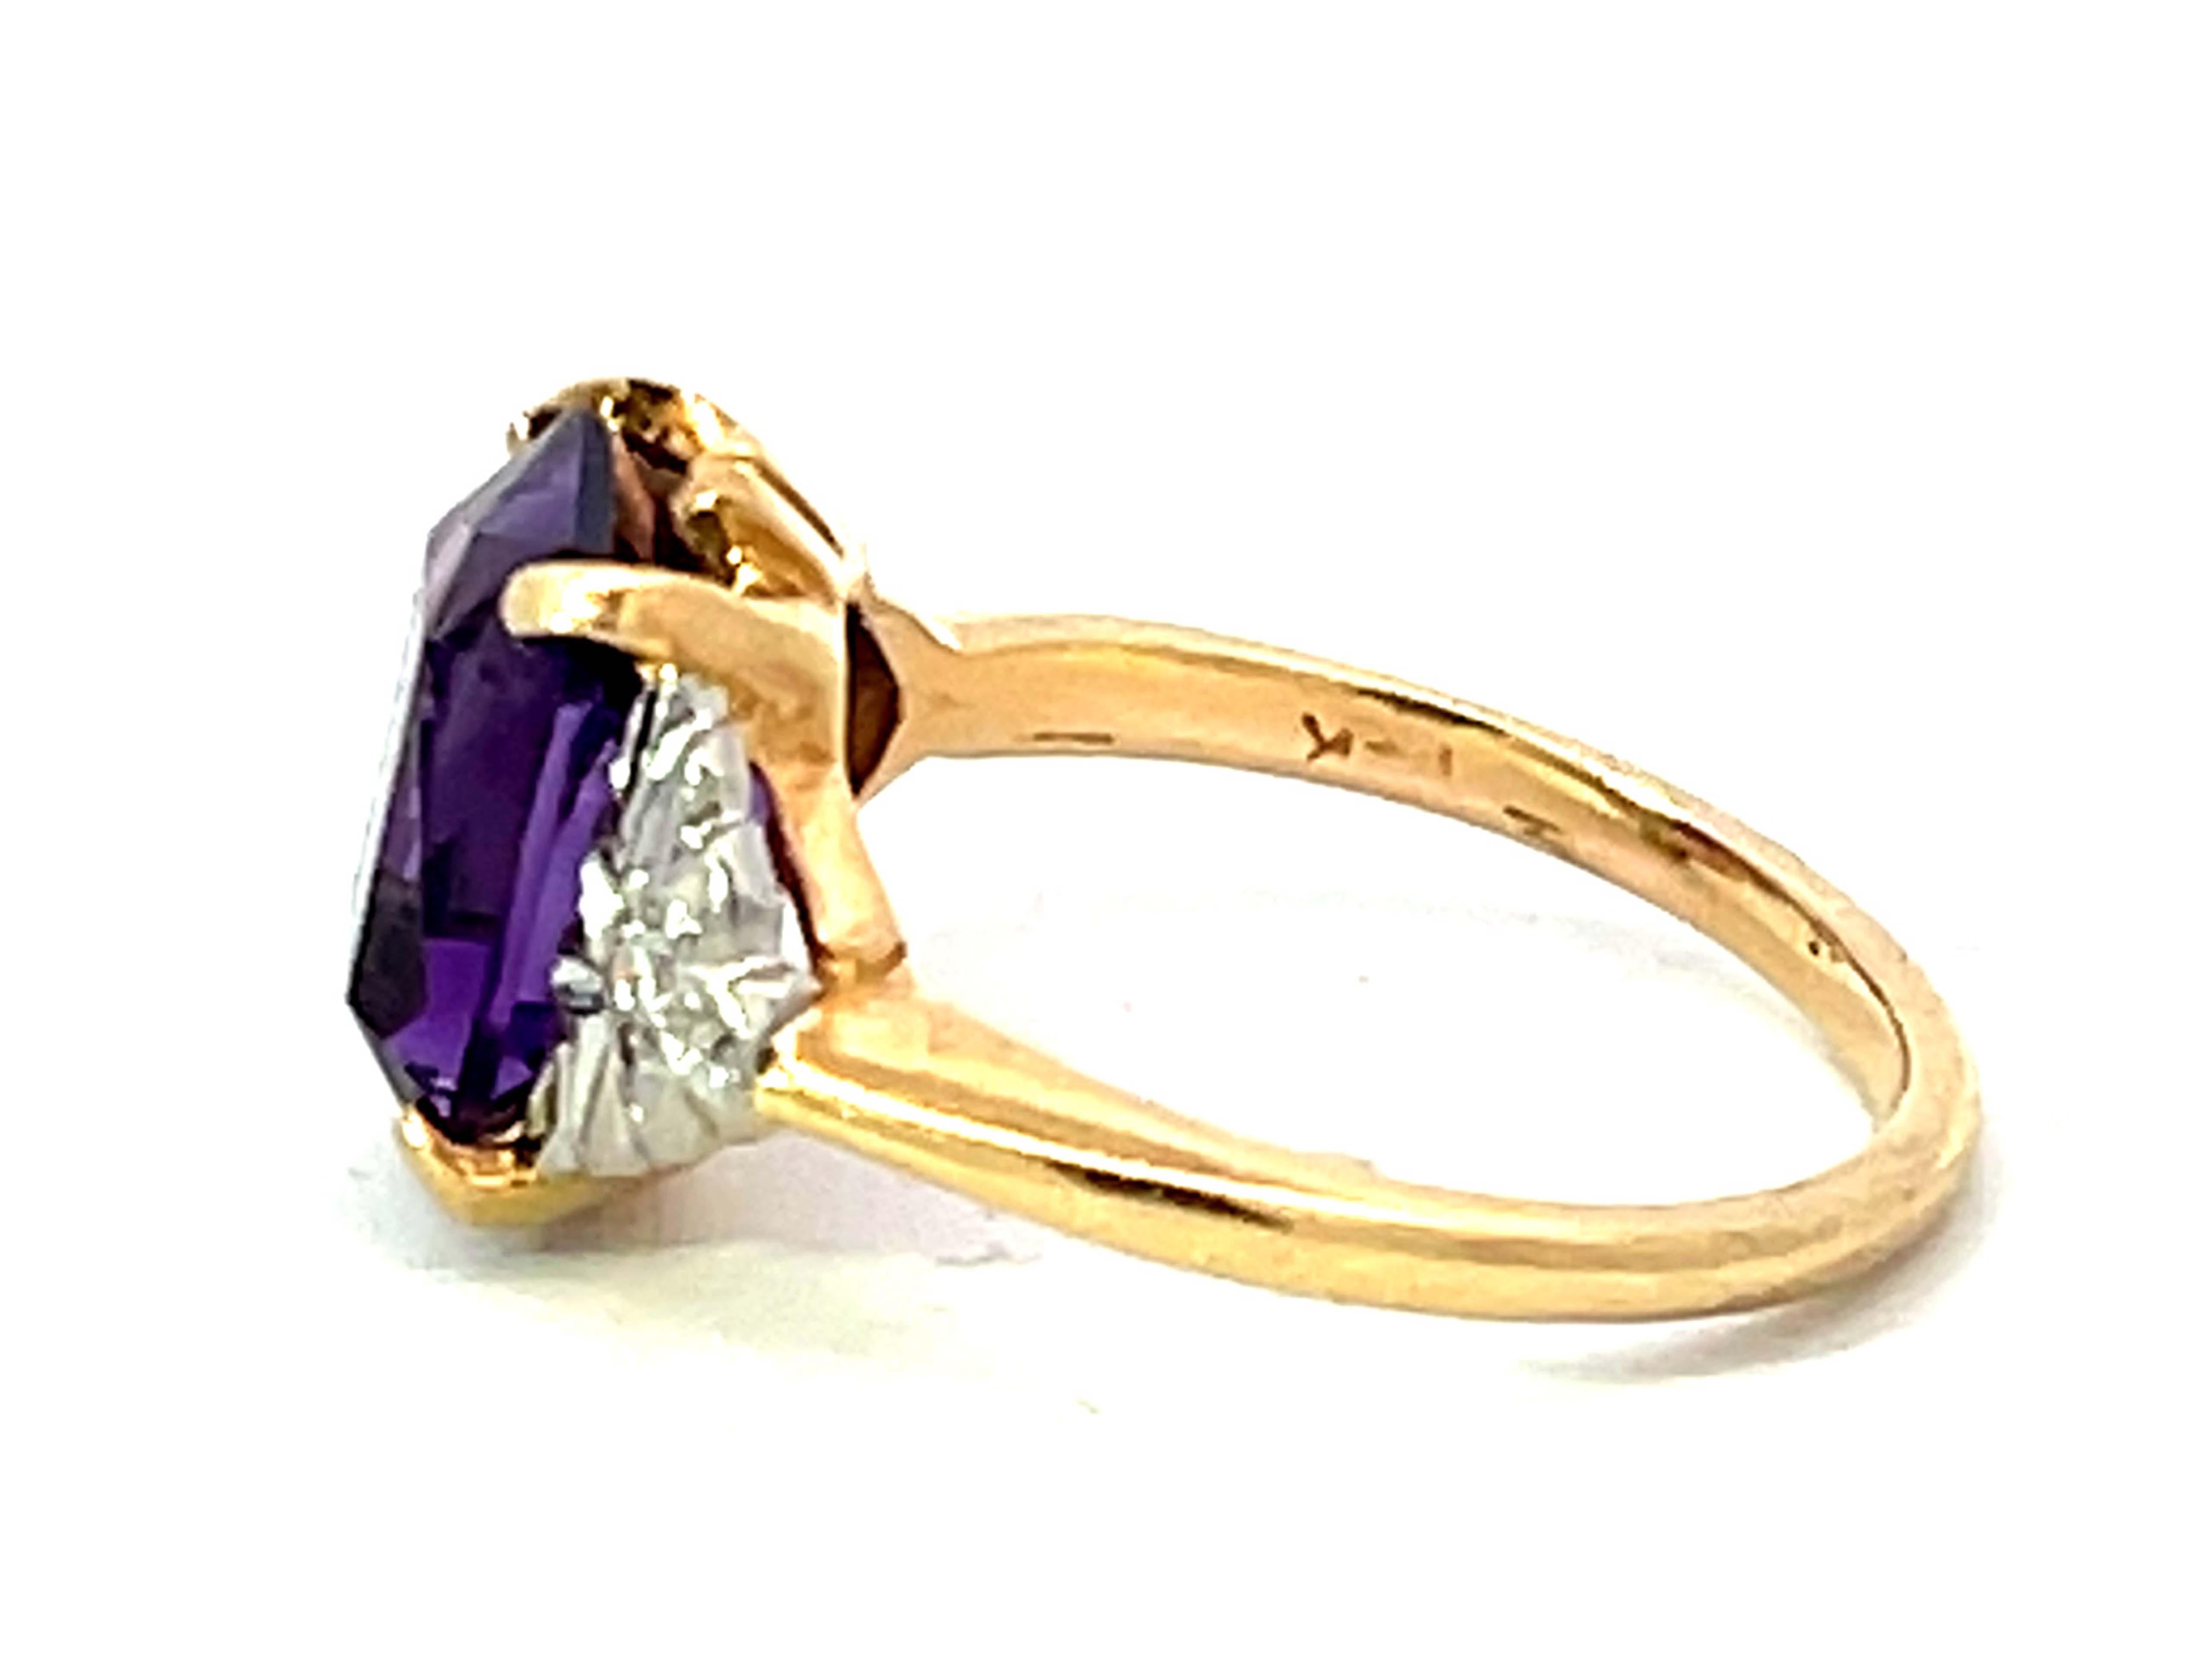 Radiant Cut Amethyst and Diamond Two Toned Ring in 14k Yellow and White Gold In Excellent Condition For Sale In Honolulu, HI